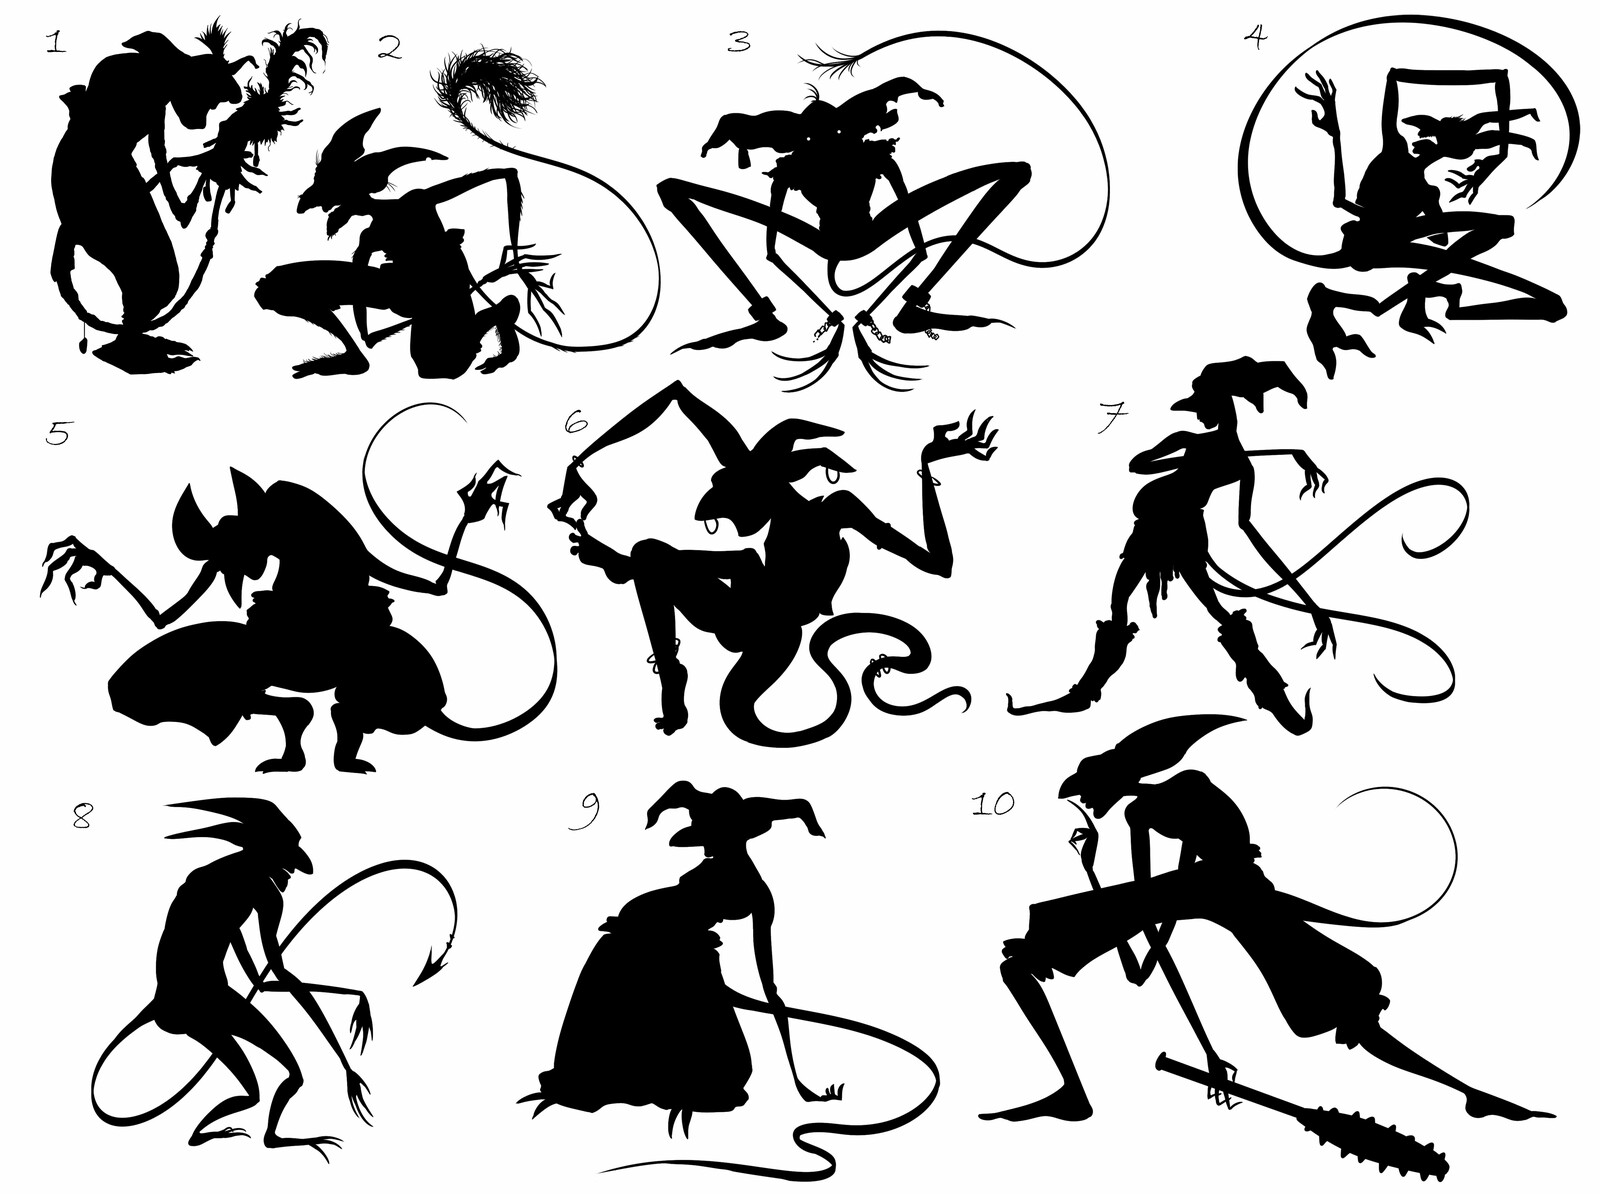 Concept silhouettes based on a previous design.